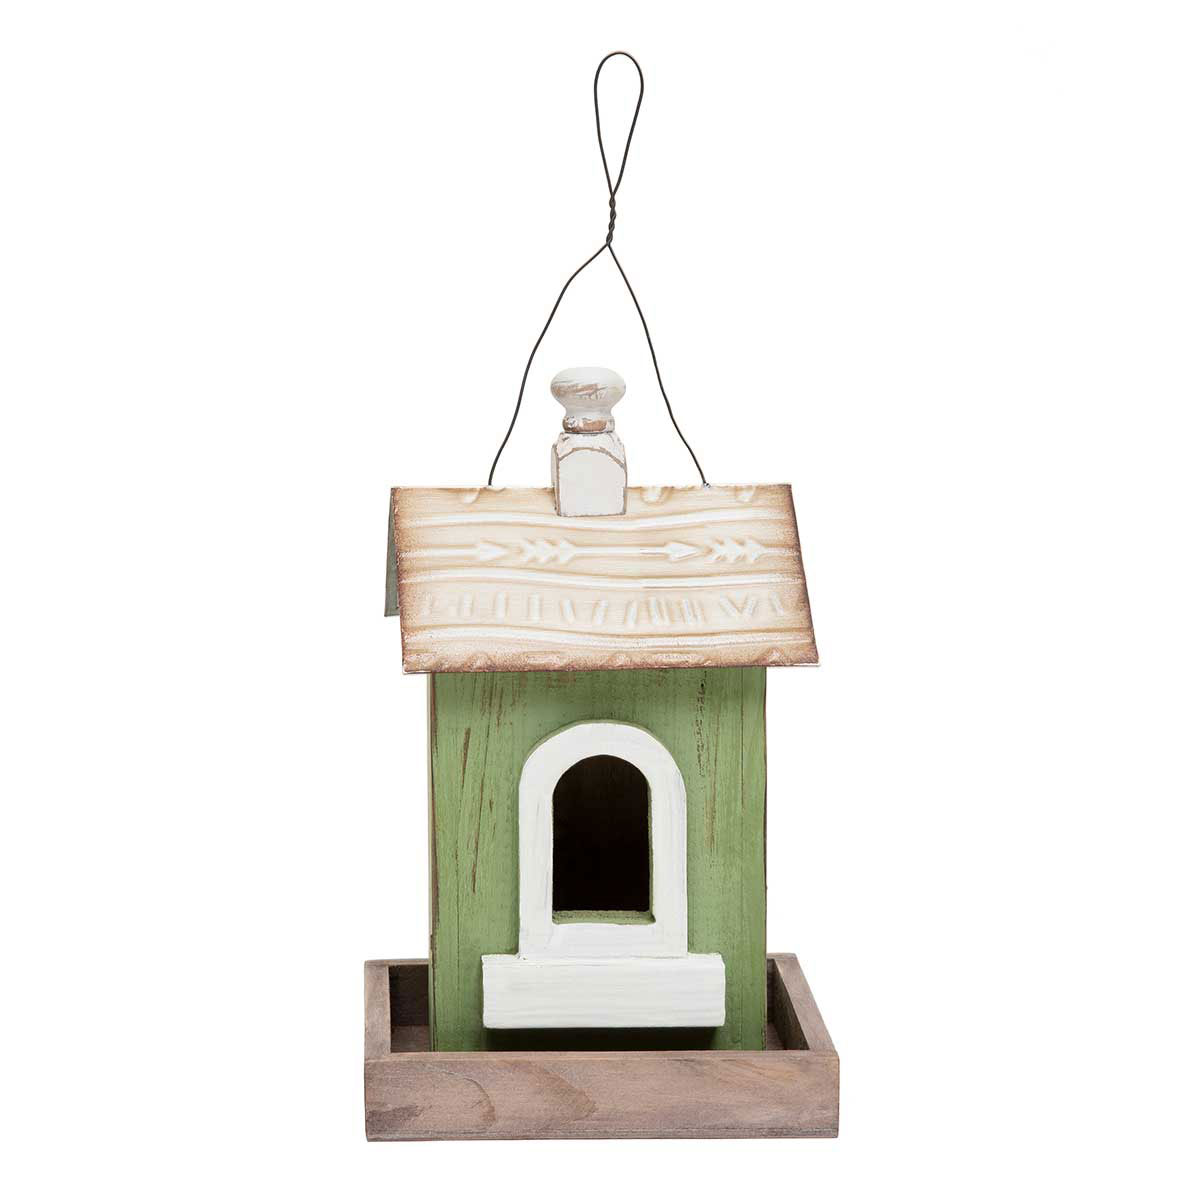 MEADOW GREEN WOOD BIRDHOUSE WITH WHITE TRIM, METAL ROOF